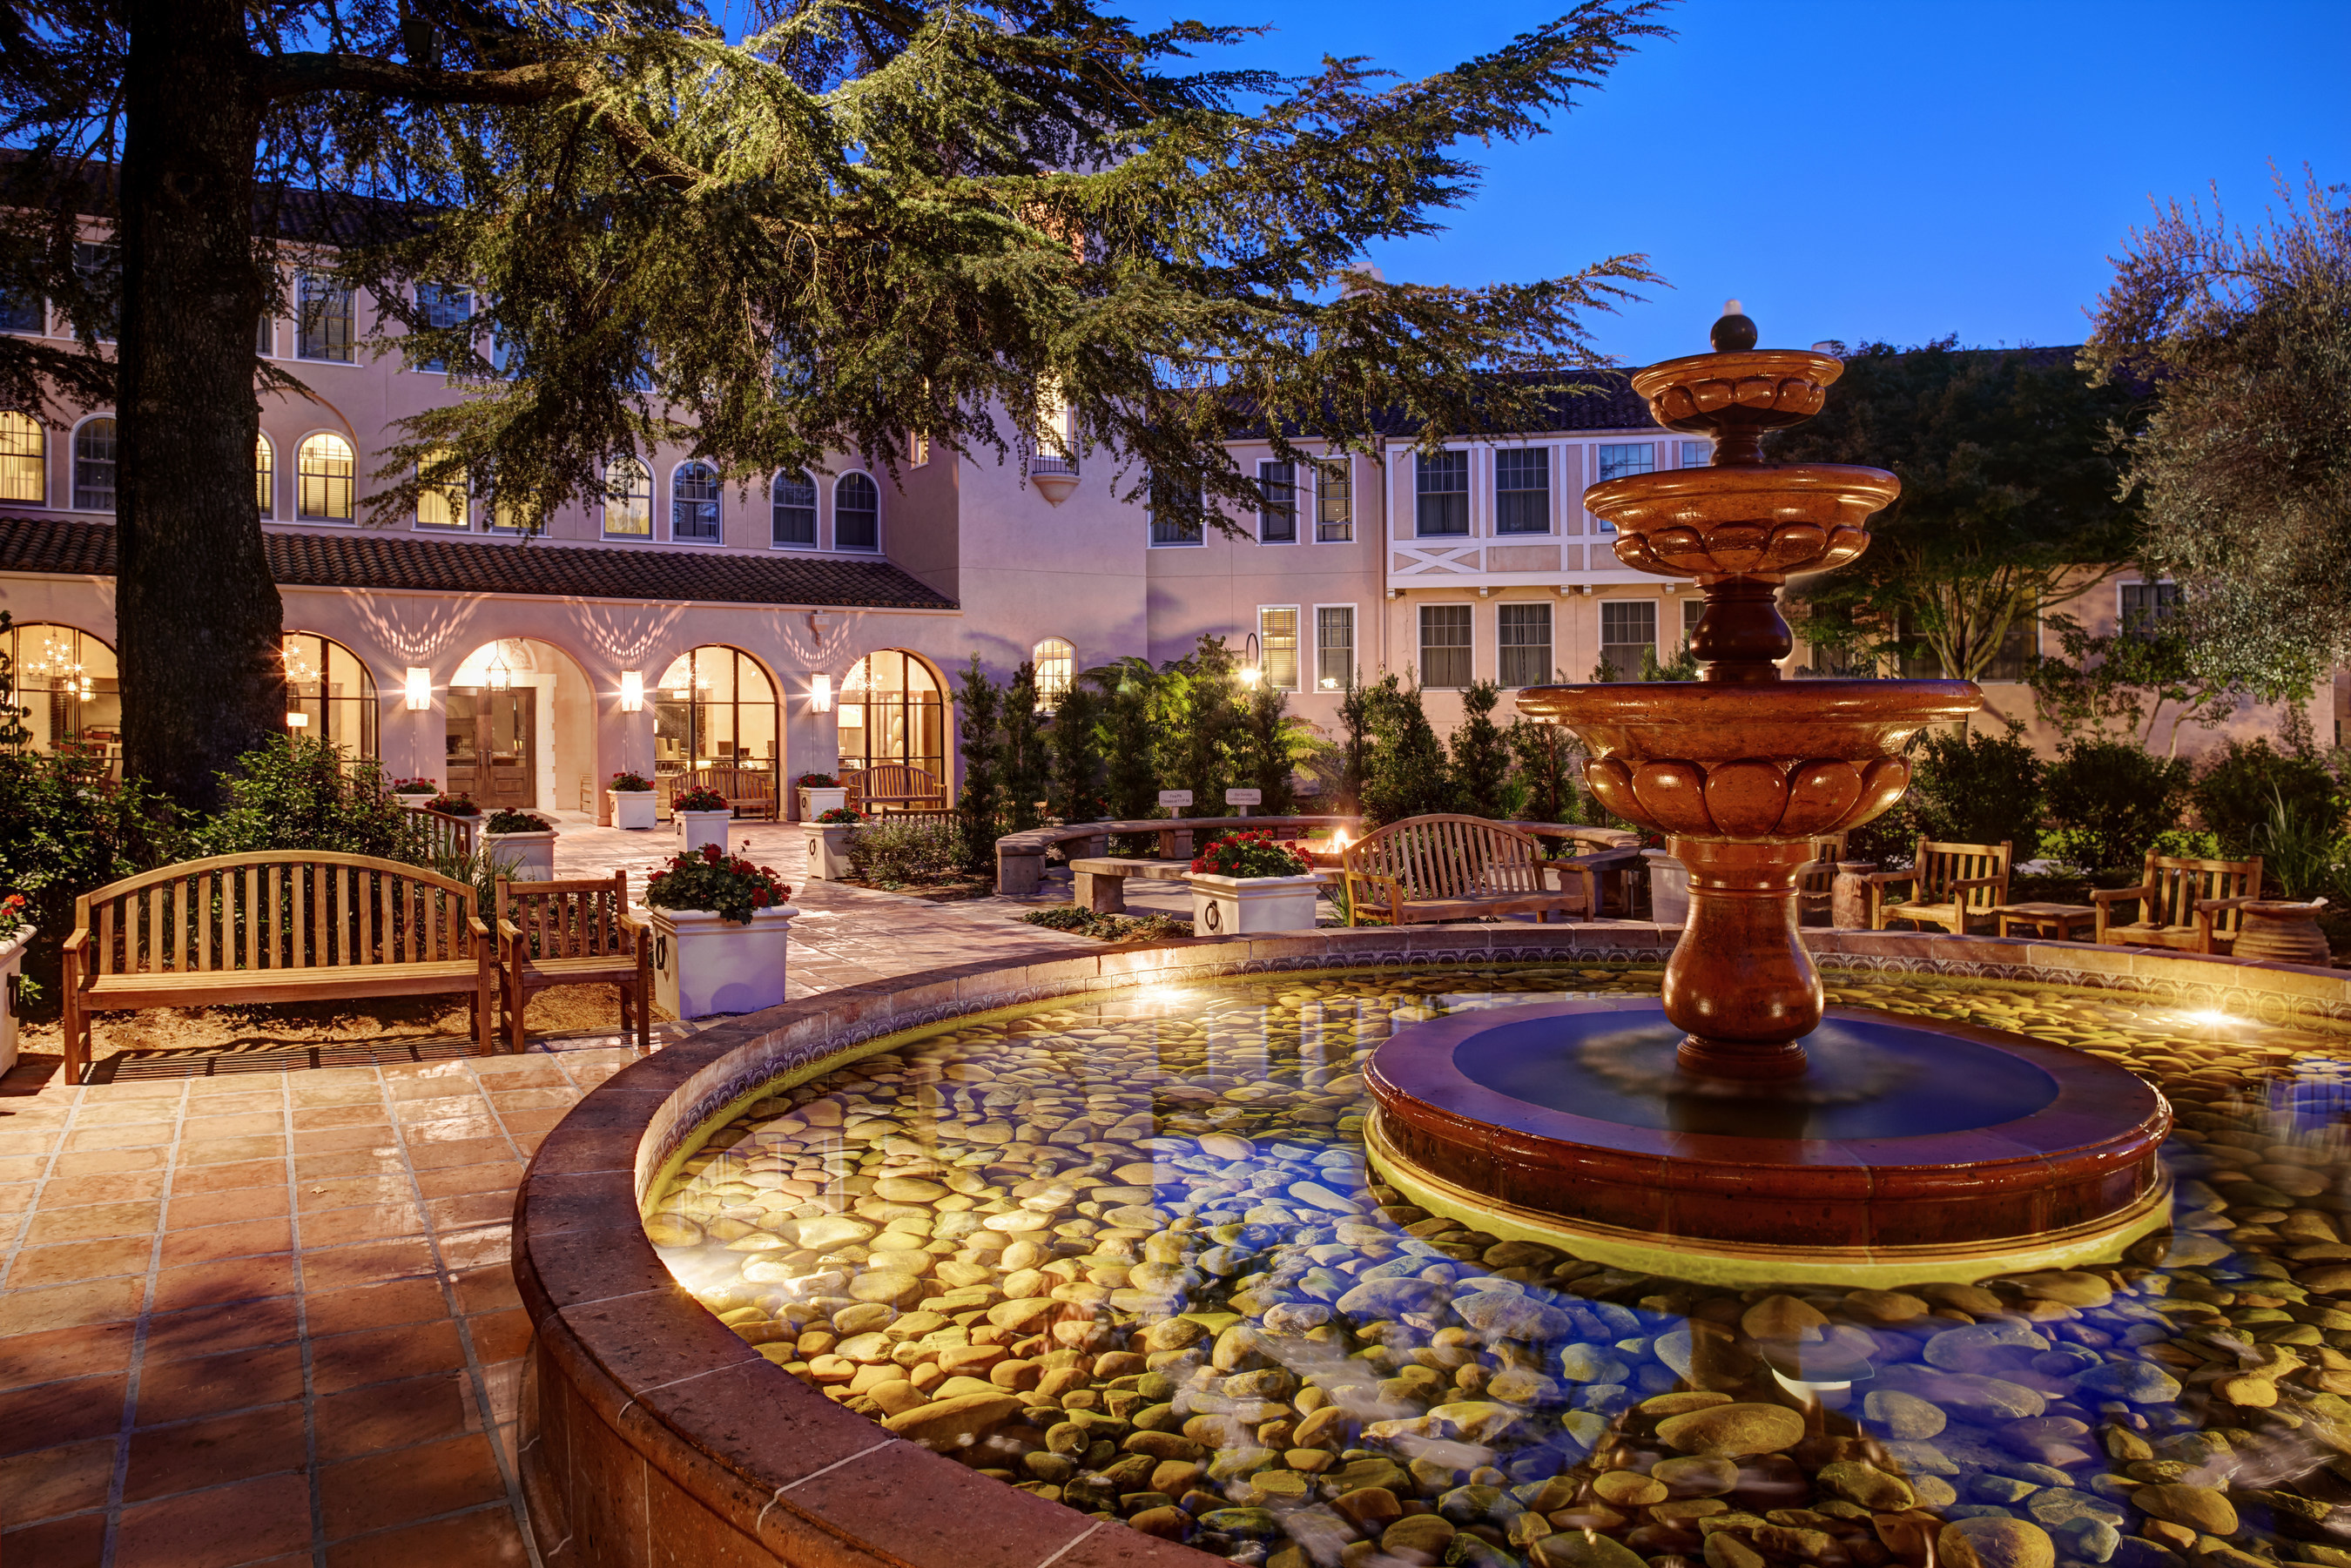 Carey Watermark Investors Incorporated acquired the remaining 25 percent interest in the Fairmont Sonoma Mission Inn & Spa, bringing its ownership of the property to 100 percent.